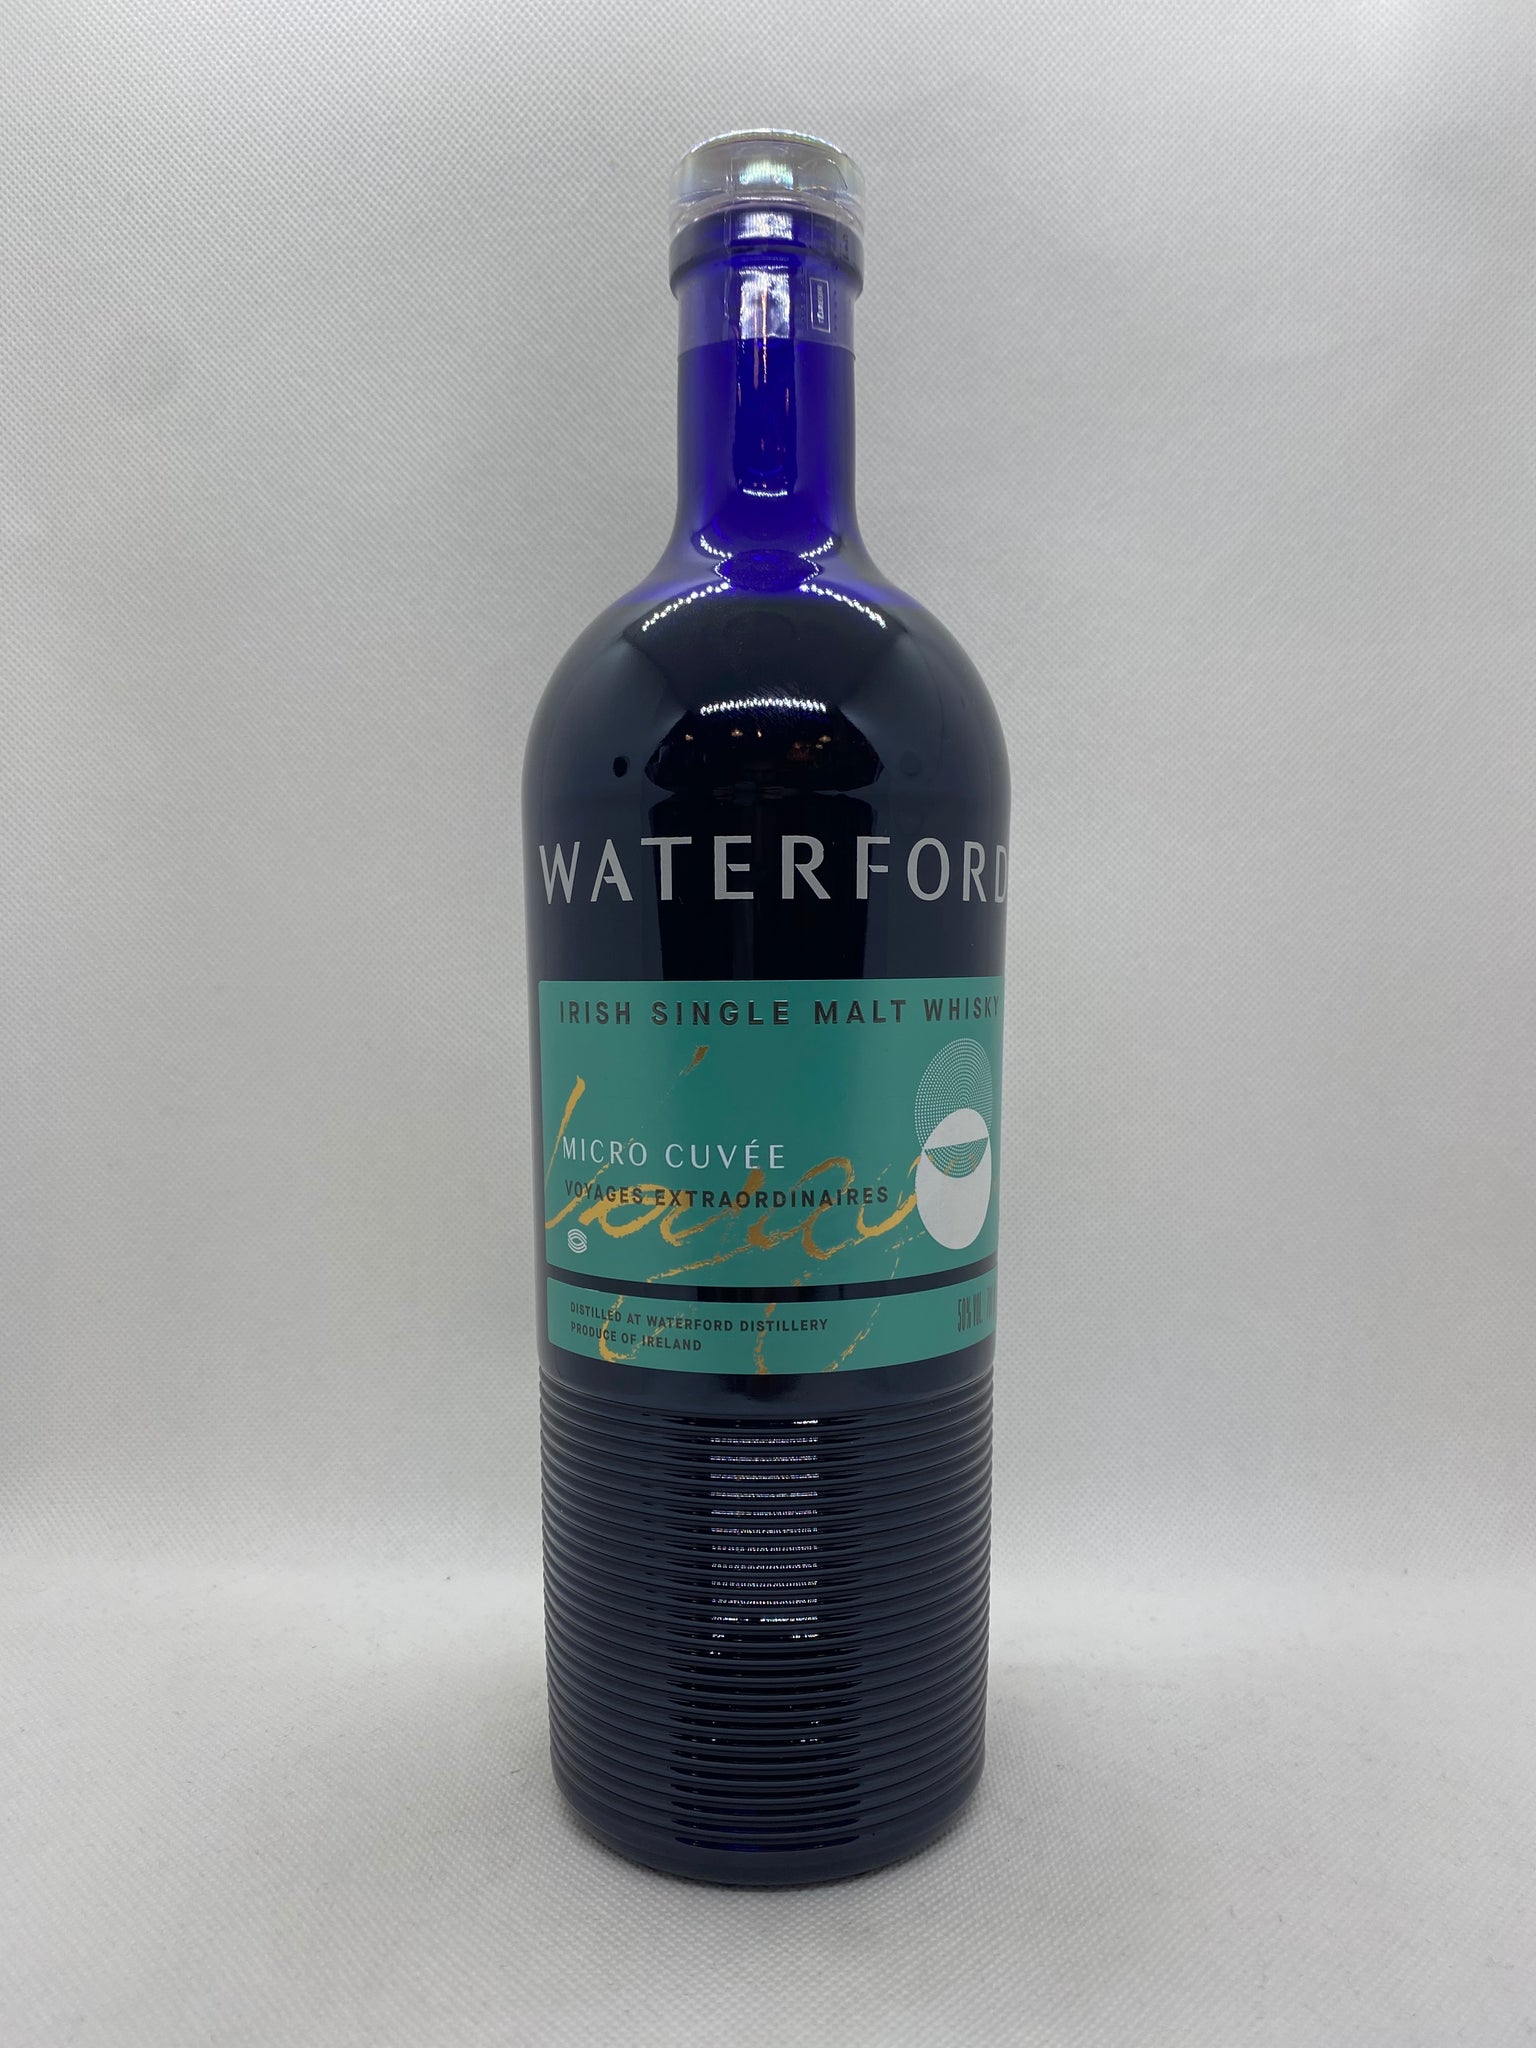 Waterford Micro Cuvée Voyages Extraordinaires 50° 70cl